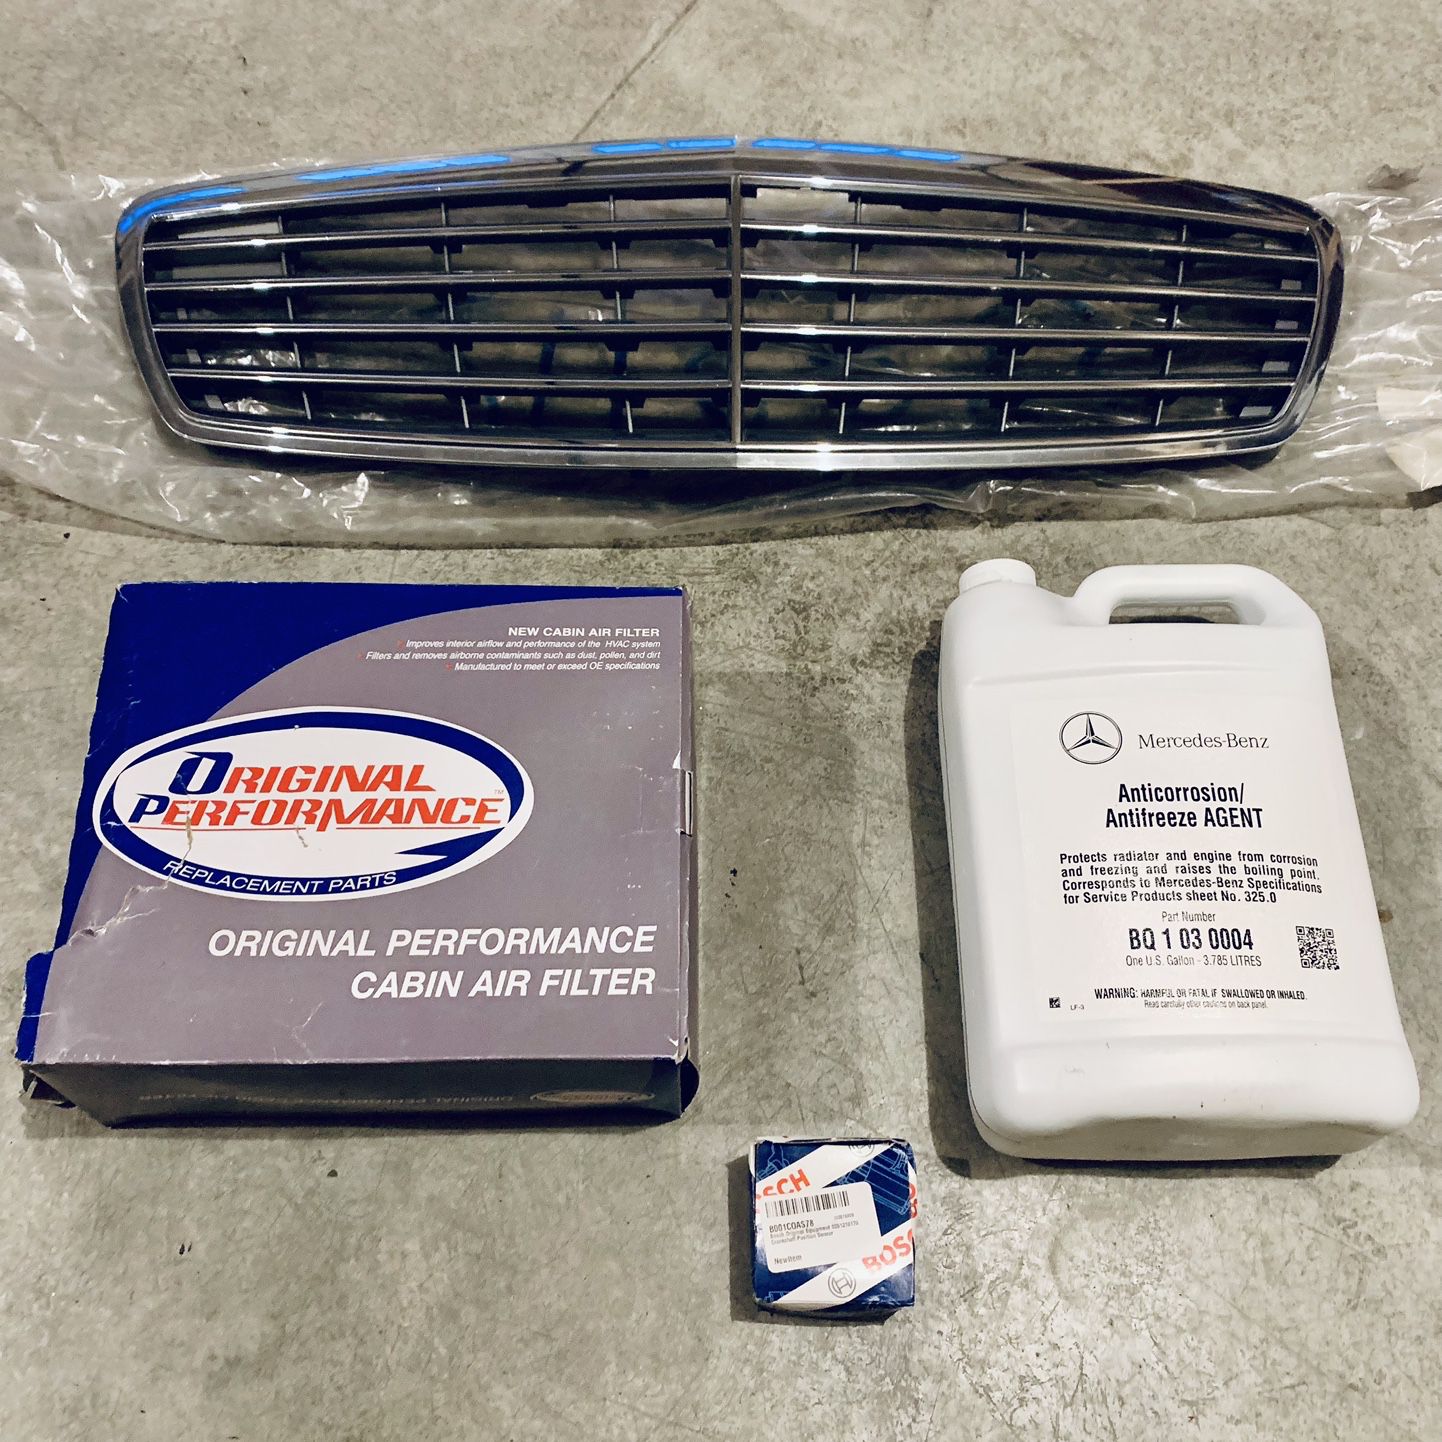 Some spare new parts for W211  MERCEDES E CLASS